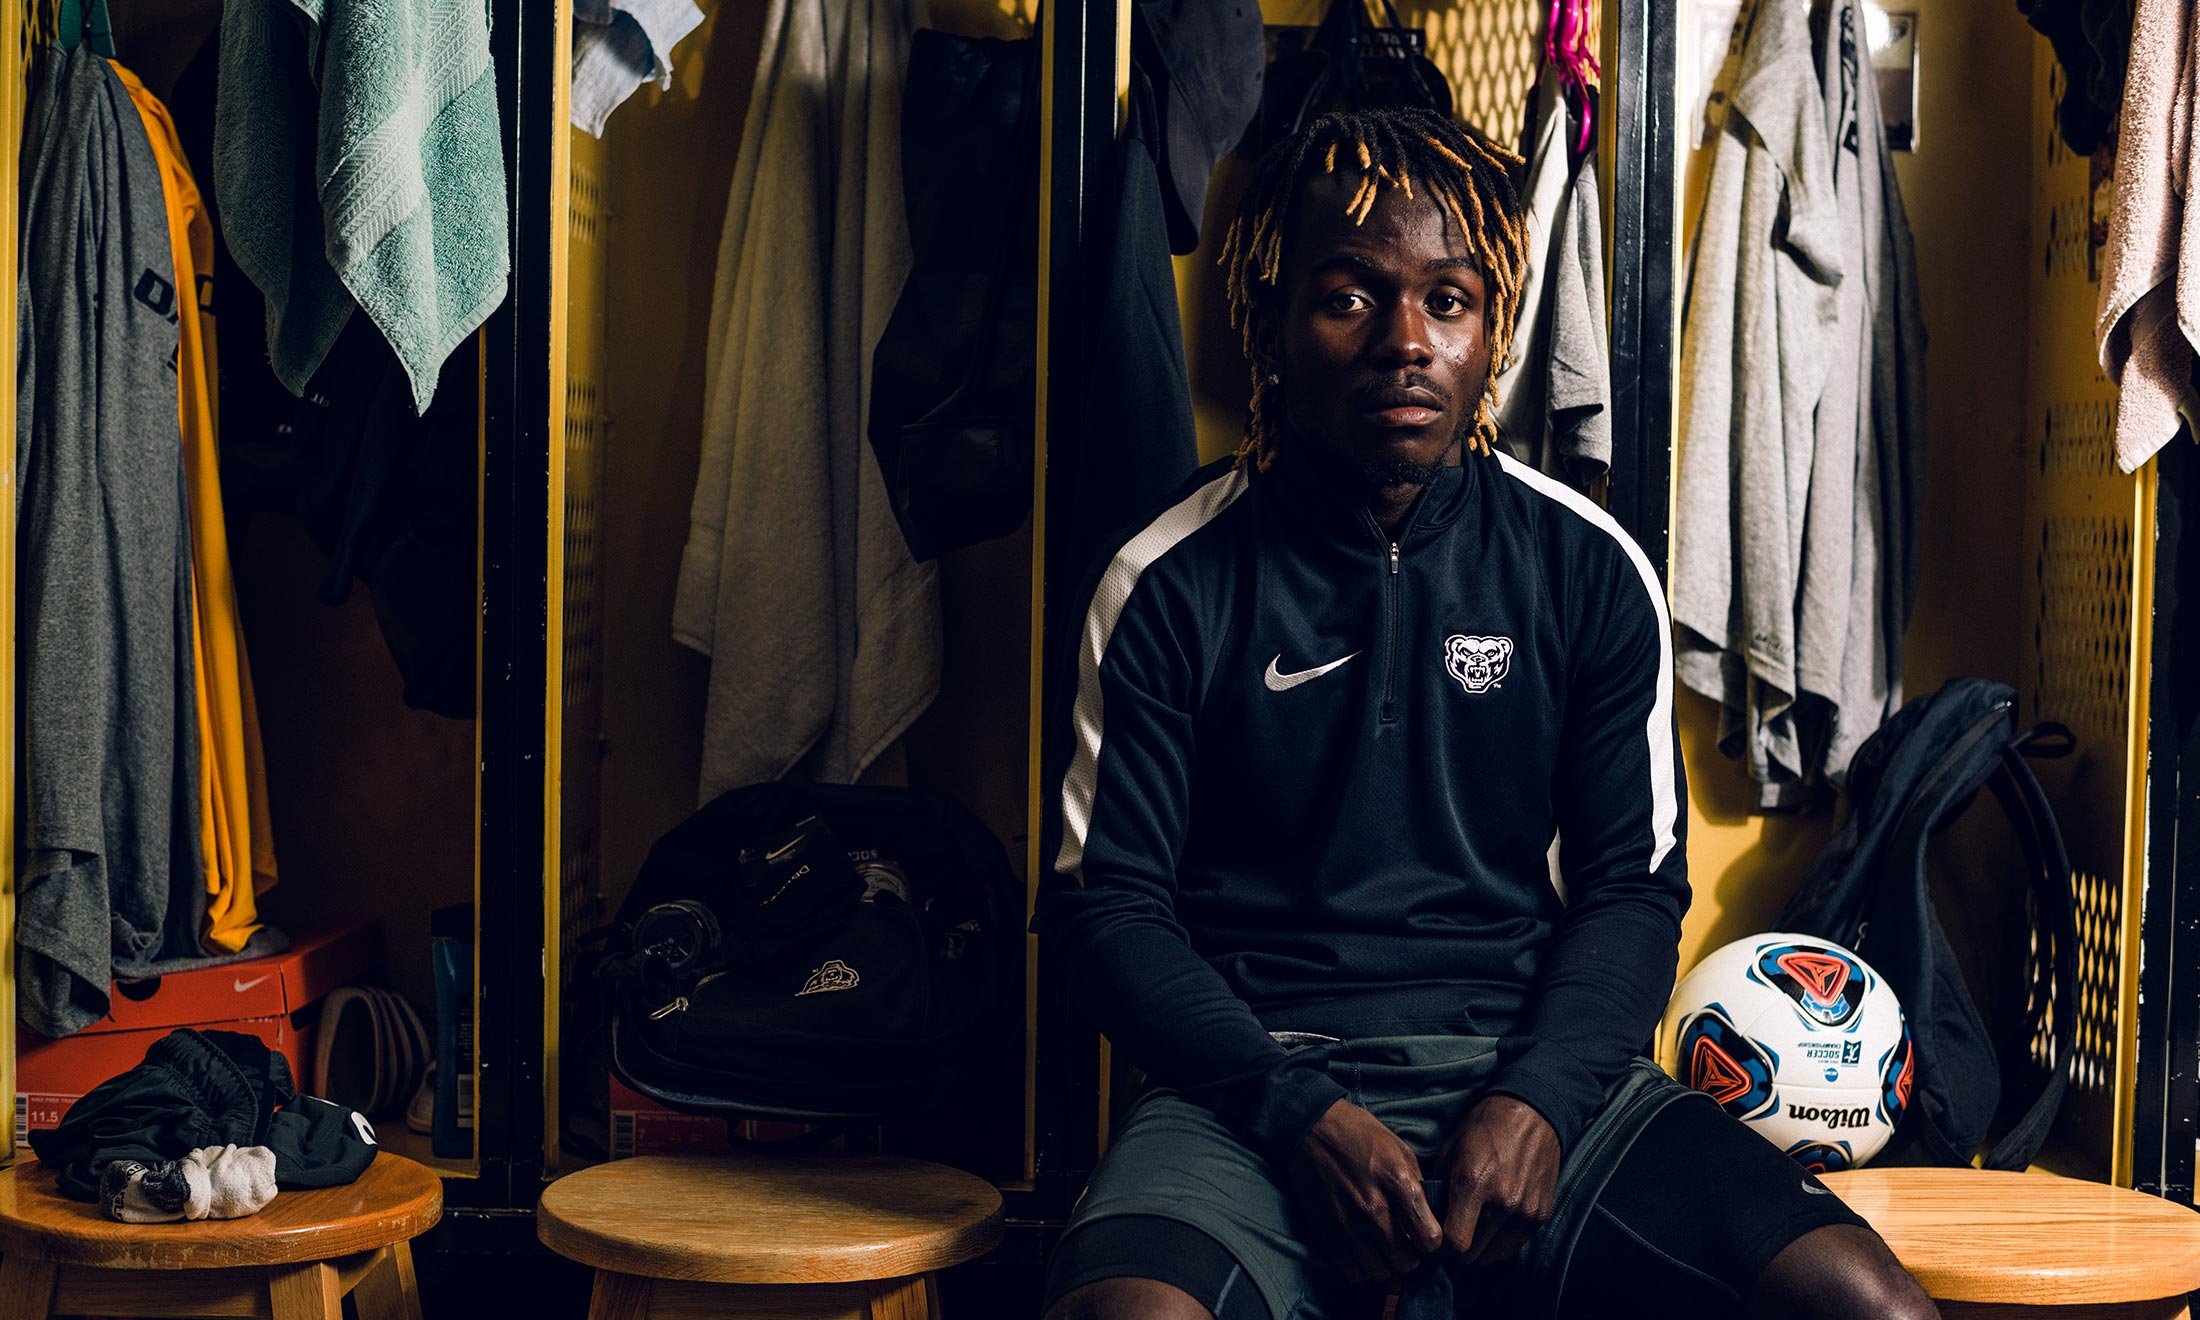 Oakland University soccer defender Wilfred Williams sits on a bench in the men's locker room with a soccer ball next to him with lockers and towels behind him